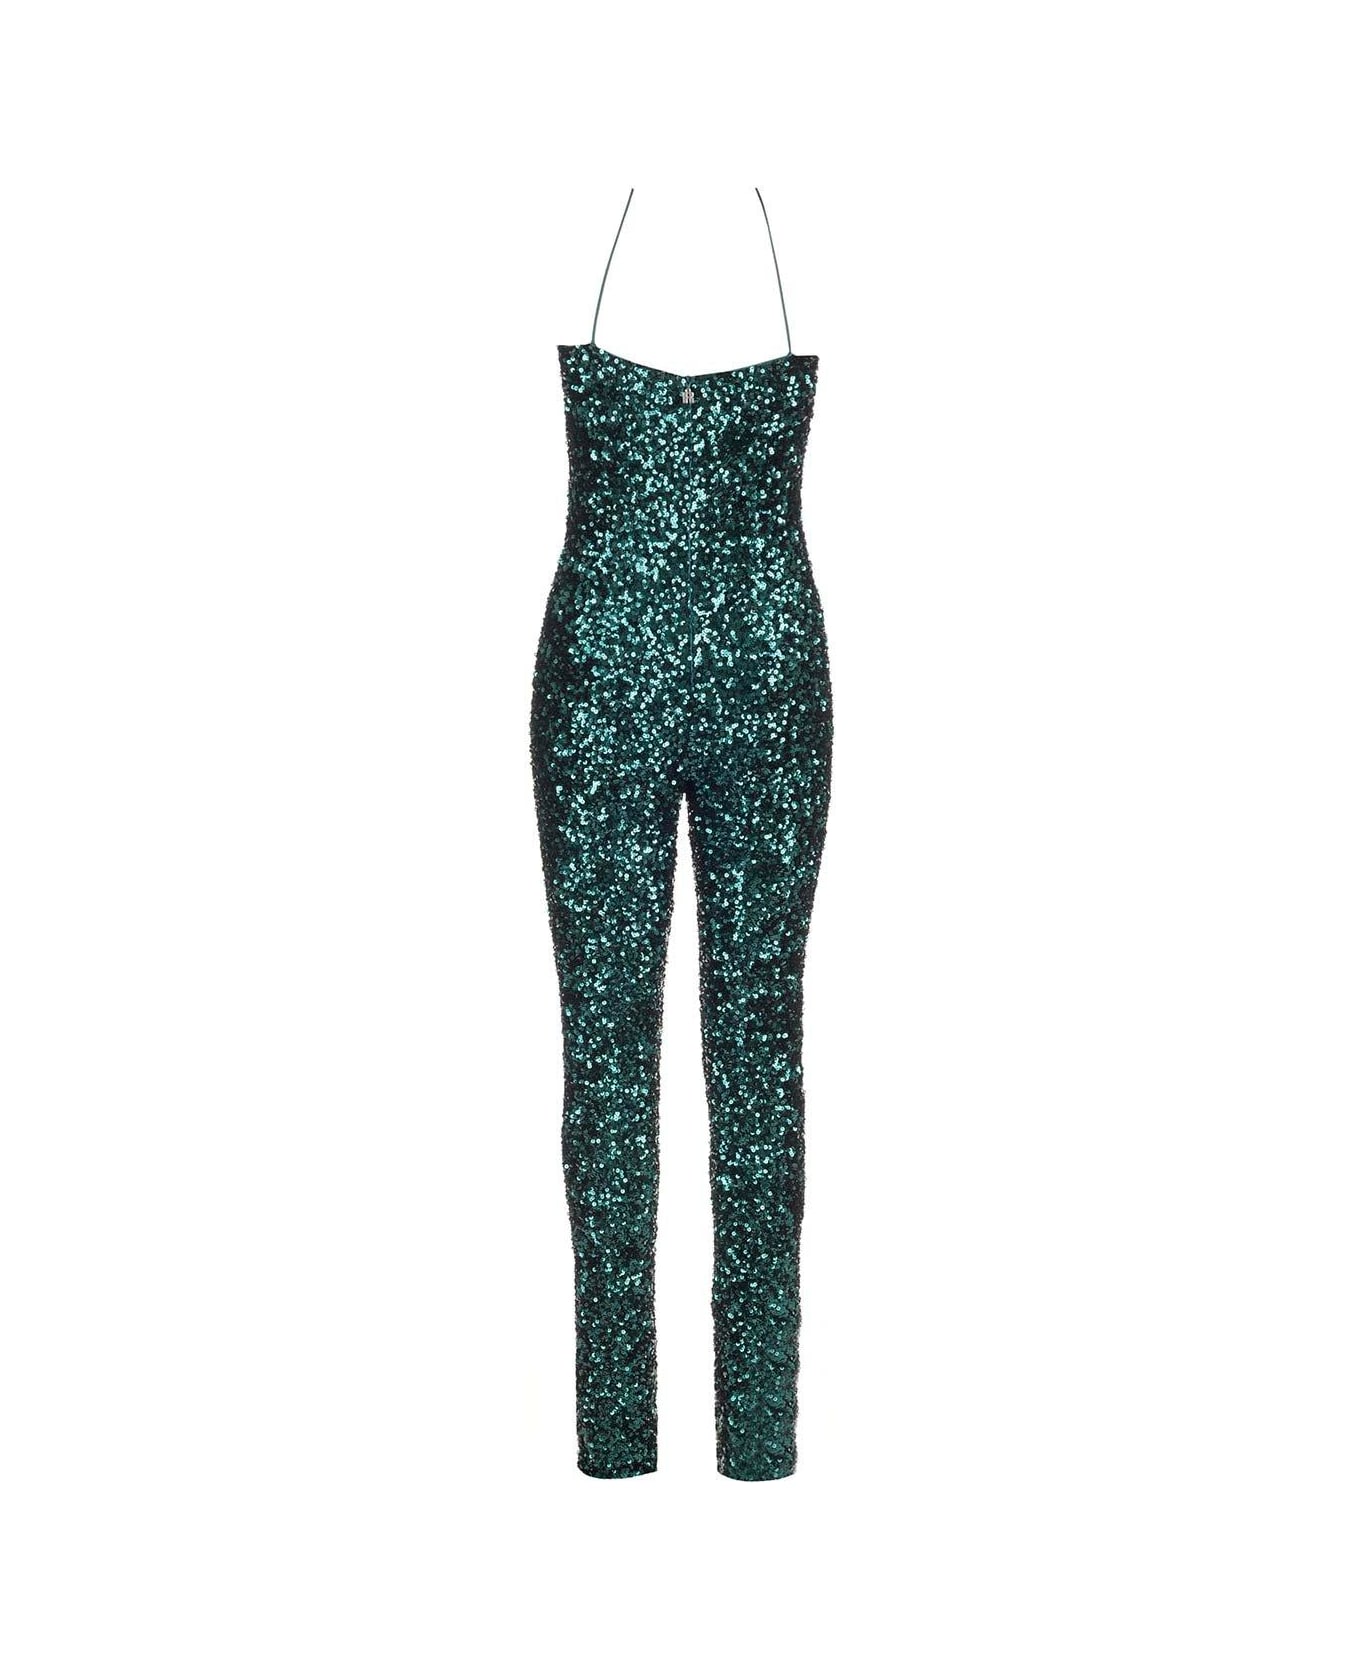 Rotate by Birger Christensen Sequin Embellished Spaghetti Straps Jumpsuit - Green